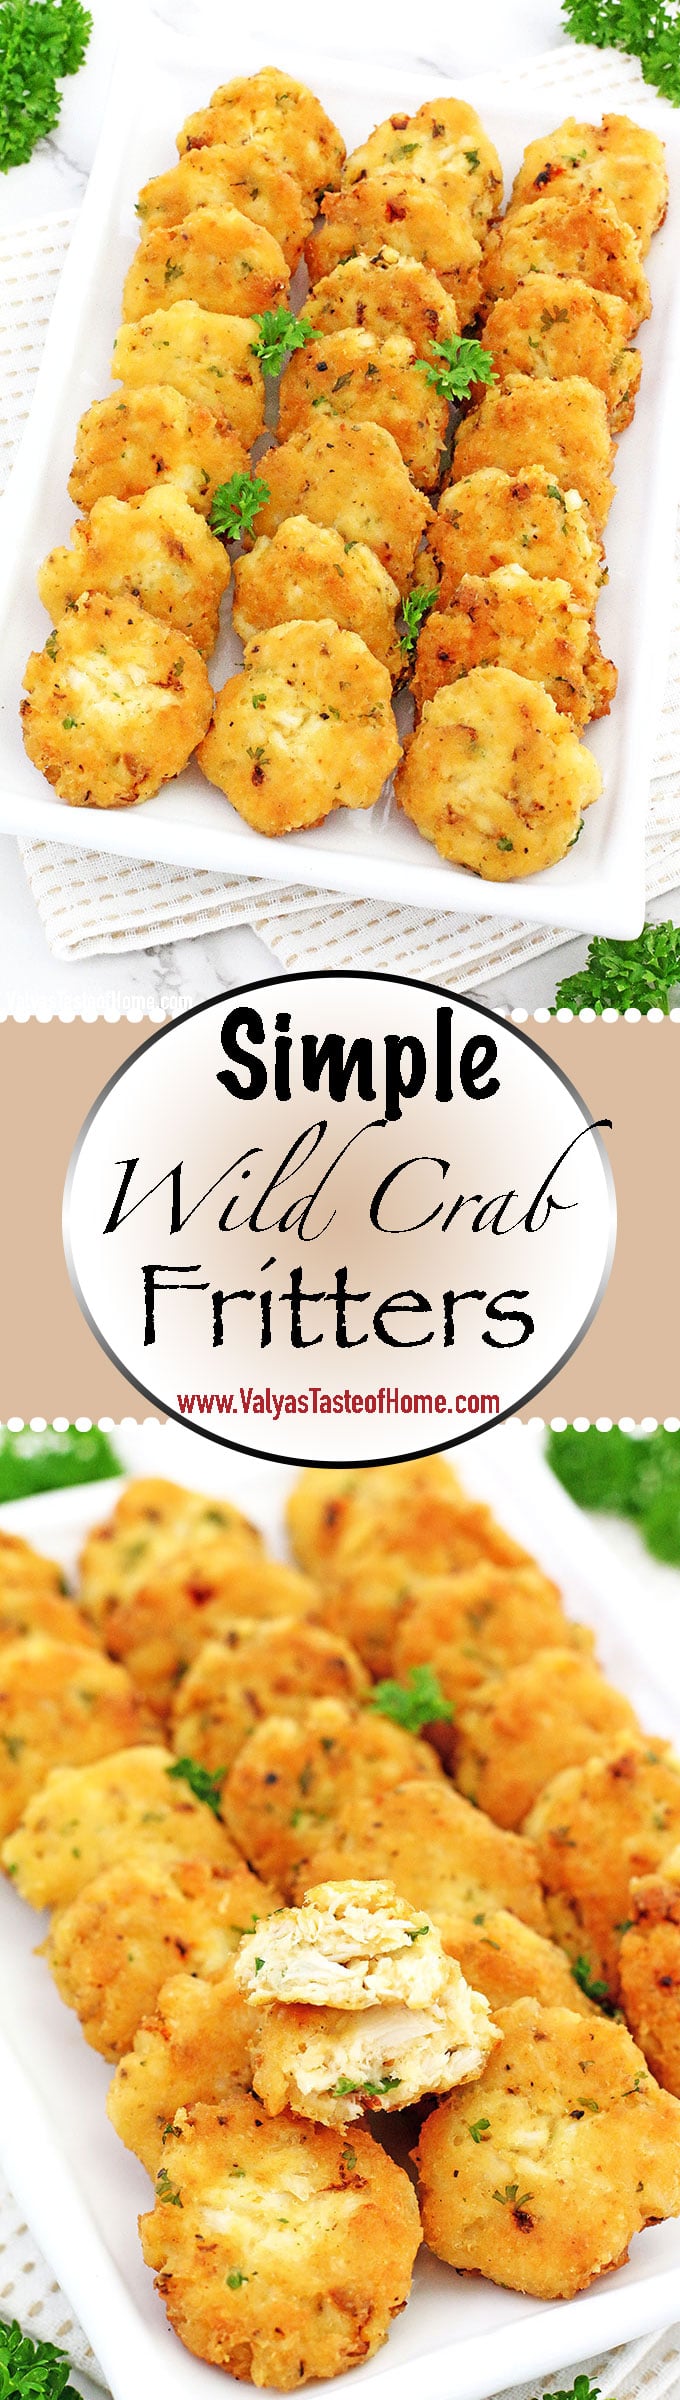 The name says it all! If you like easy recipes then this Simple Wild Crab Fritters Recipe is for you. The most scrumptious crab cakes you can taste. Crisp on the inside, tender and juicy on the inside and the flavors are absolutely incredible. 